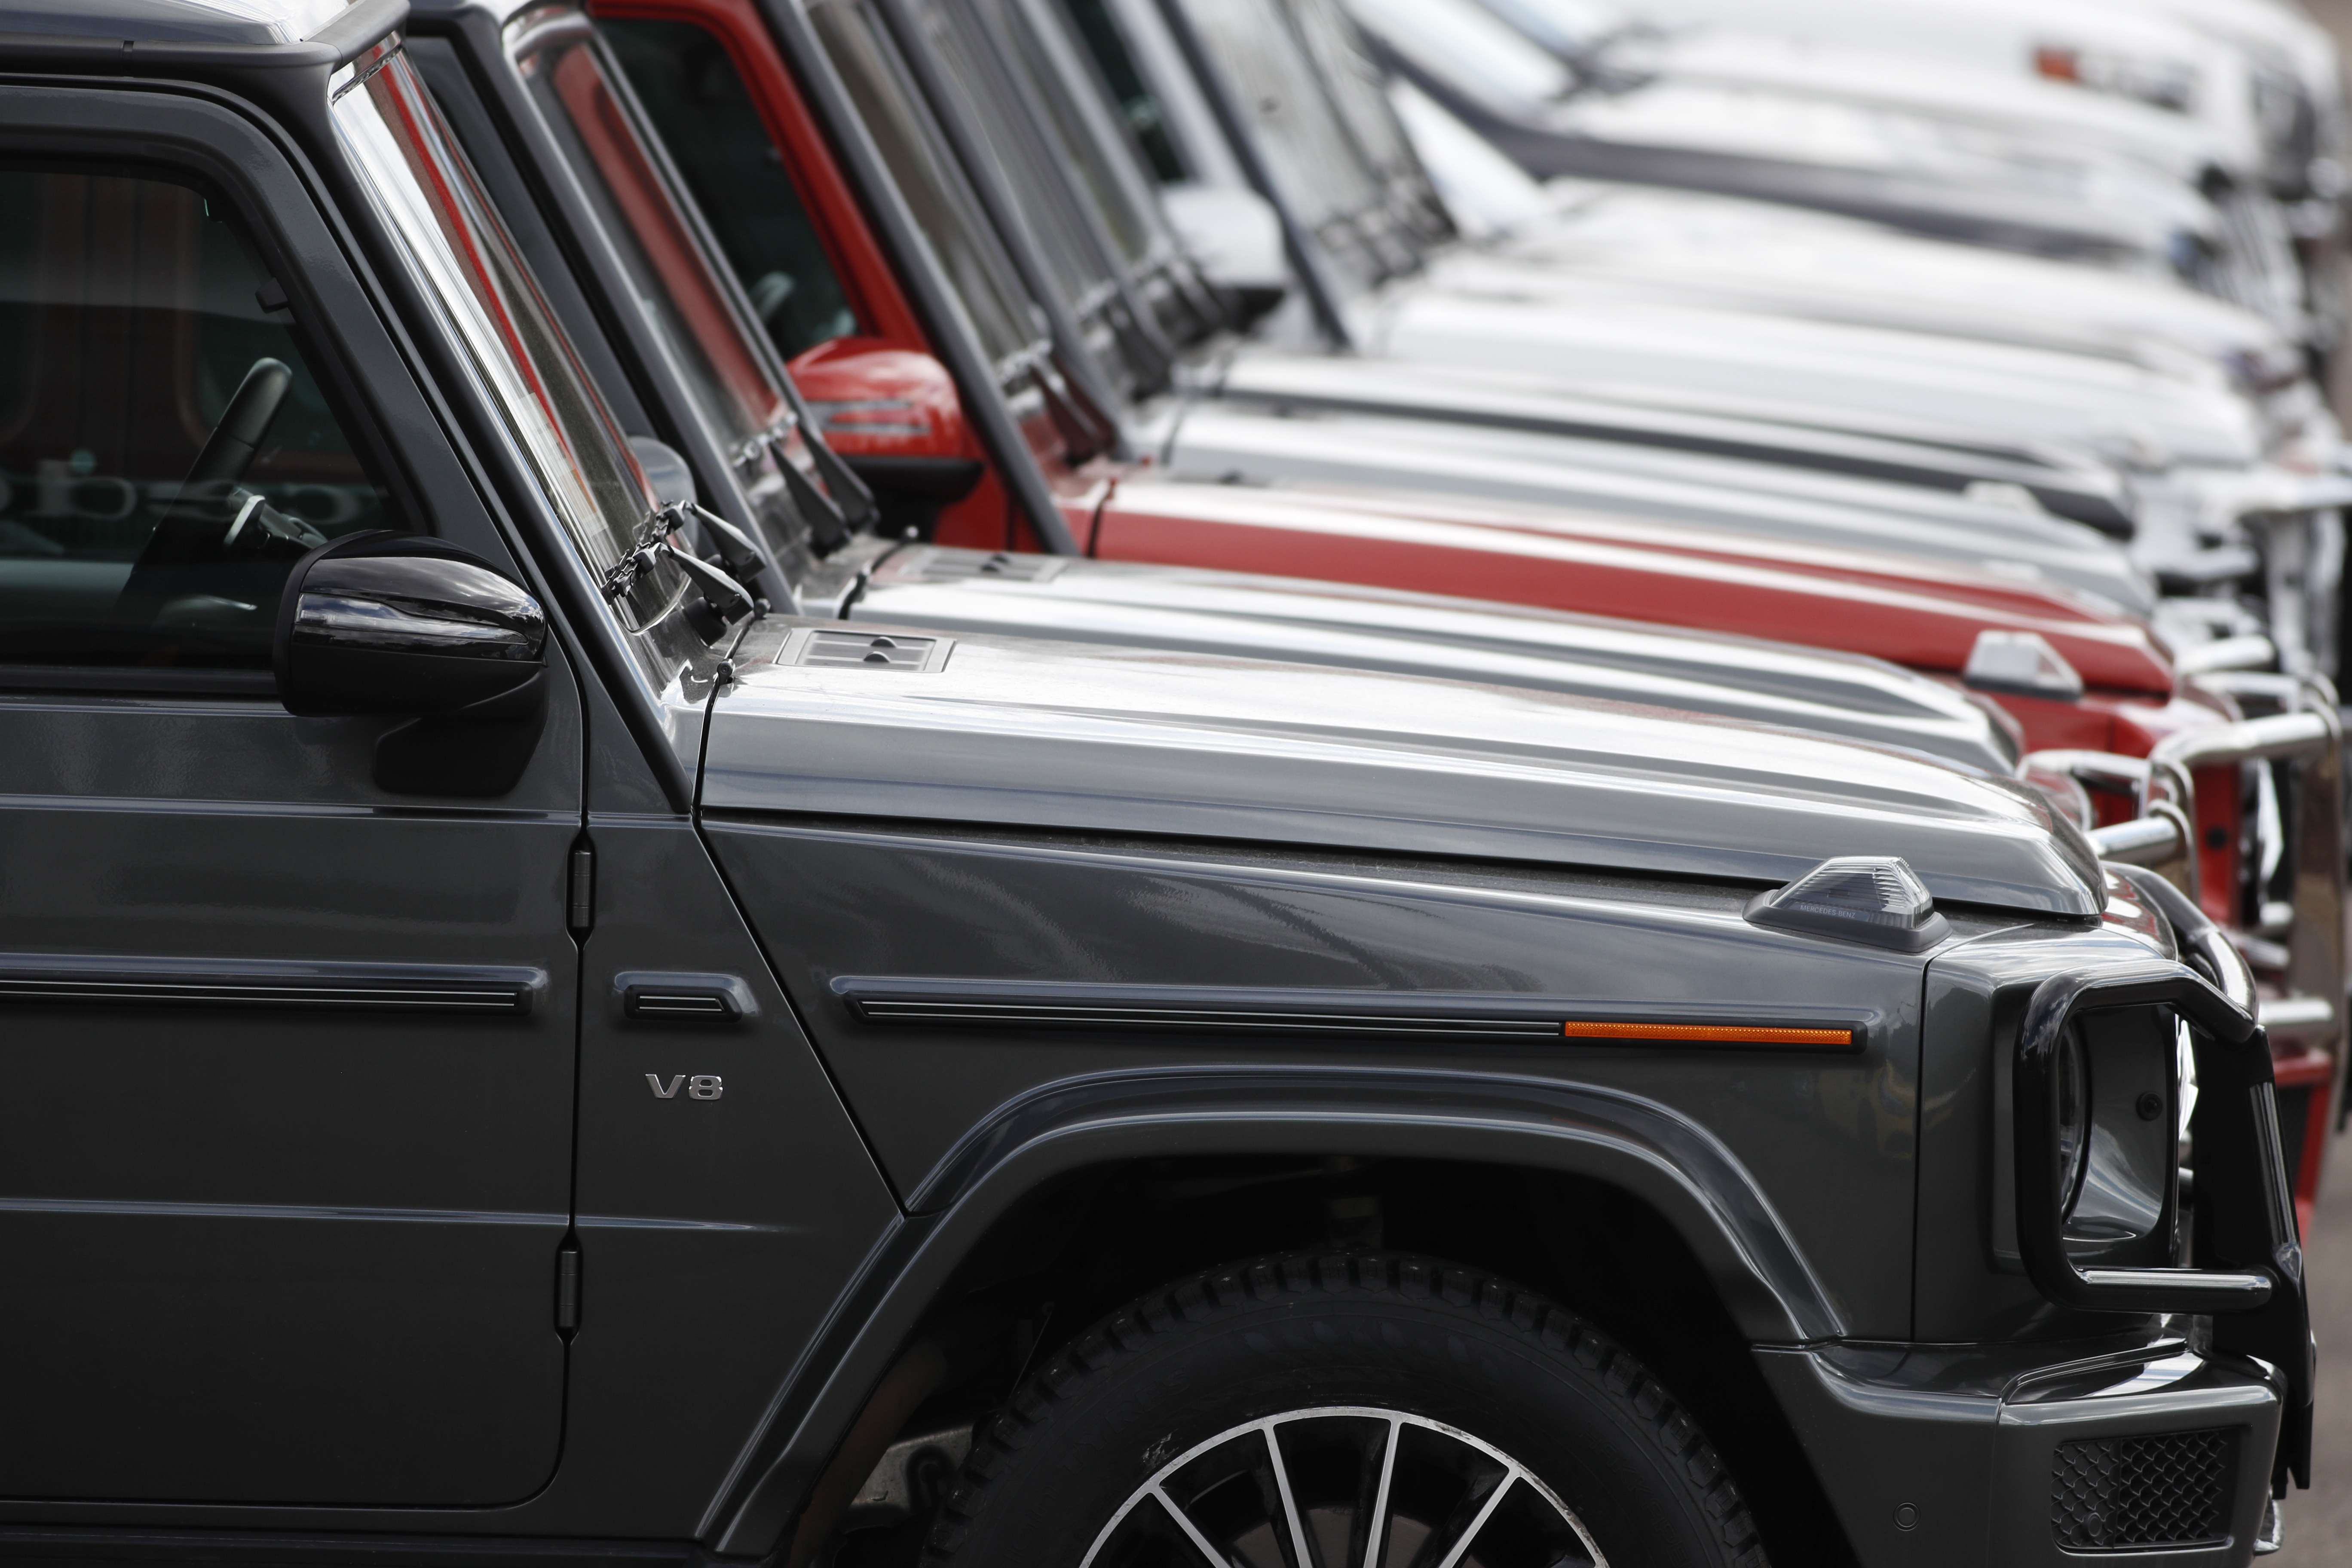 In this Sunday, April 5, 2020, photograph, a long row of unsold 2020 G63 sports-utility vehicles sits at a Mercedes Benz dealership in Littleton, Colo. (AP Photo/David Zalubowski)